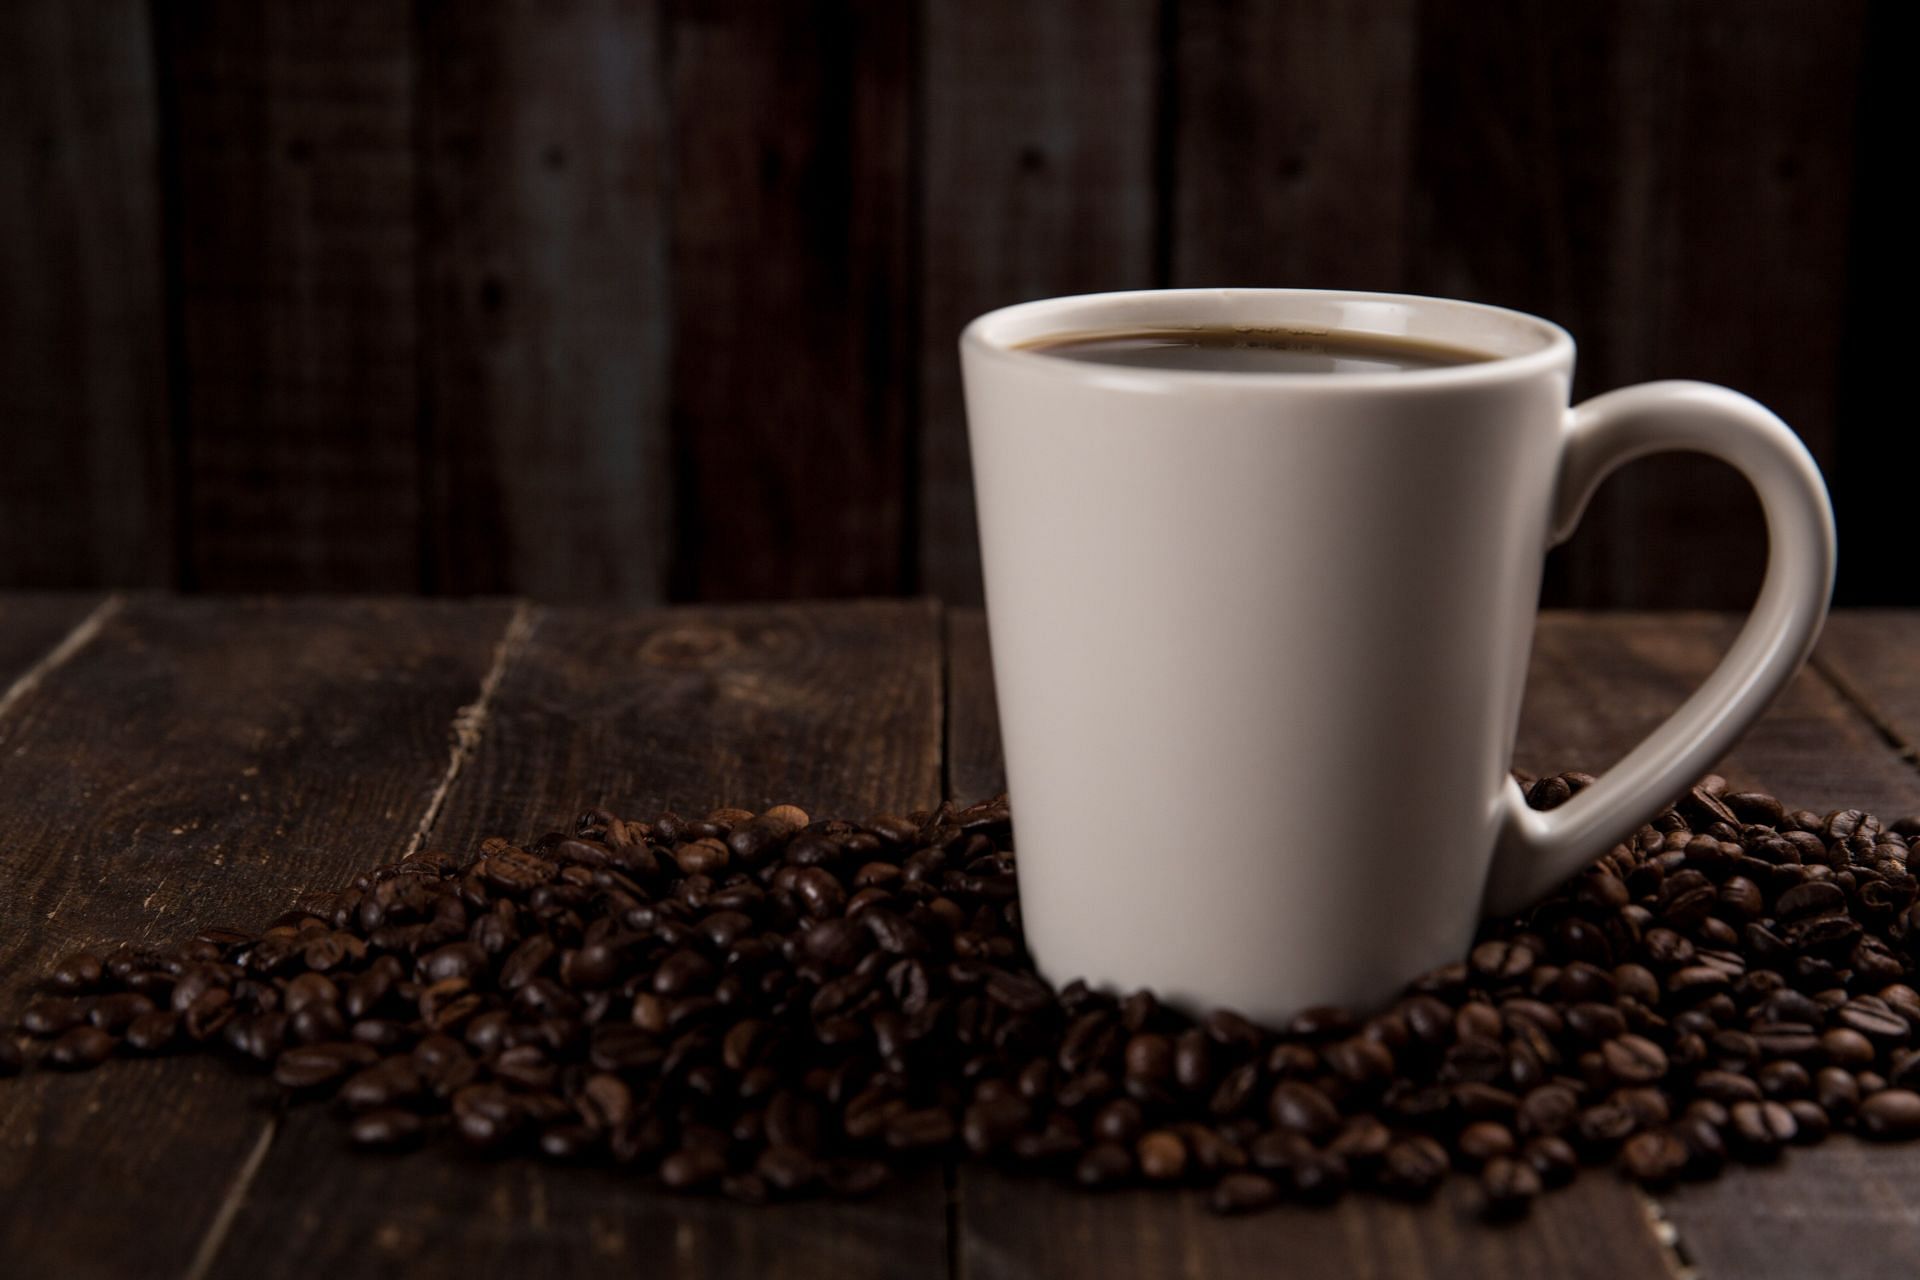 Drink caffeine before workout for greater energy. (Image via Pexels/Toni Cuenca)